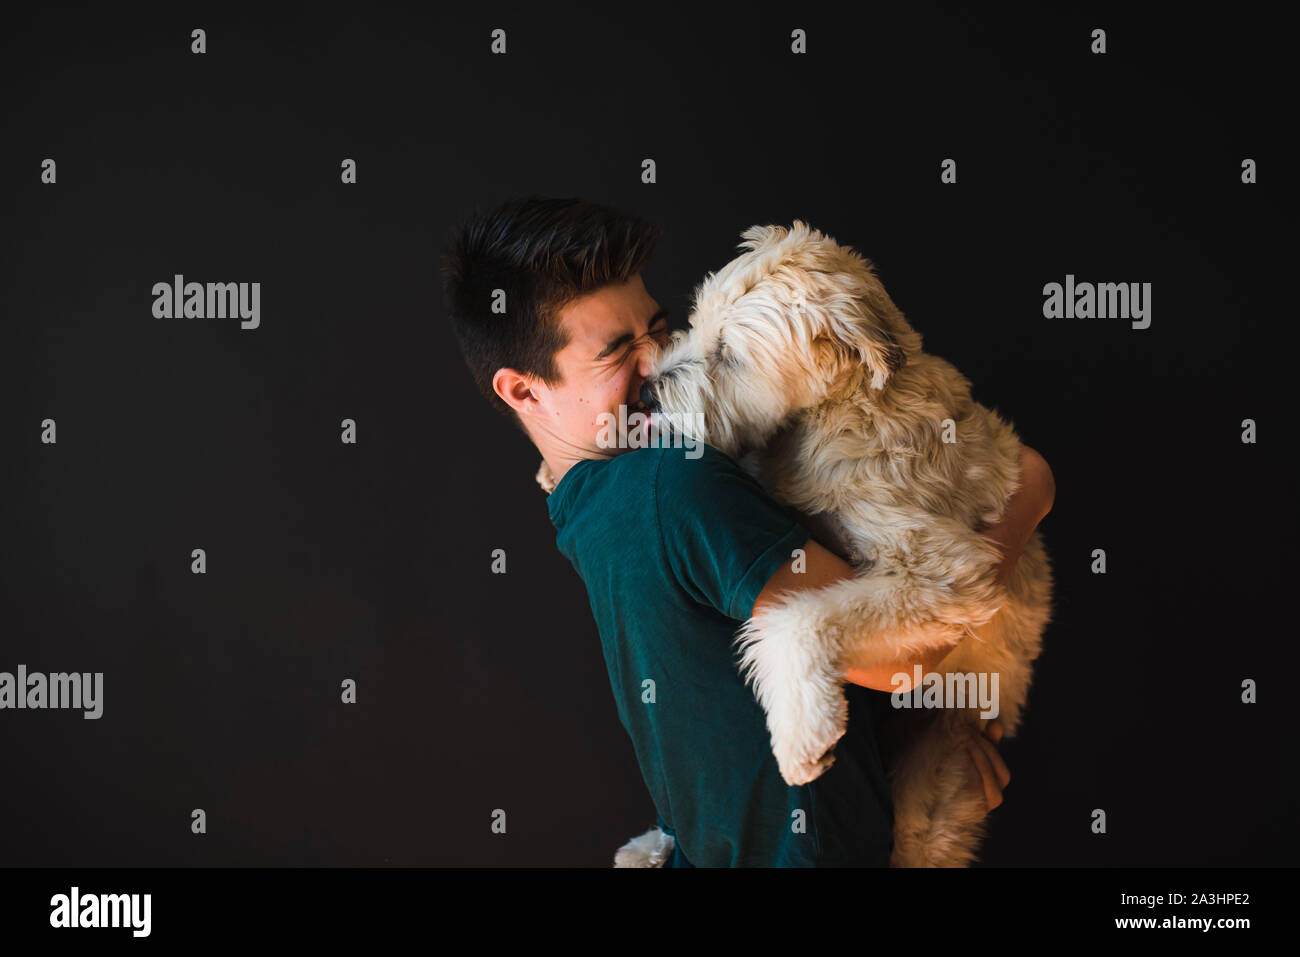 Teenage boy holding a fluffy dog that his licking him on the face. Stock Photo